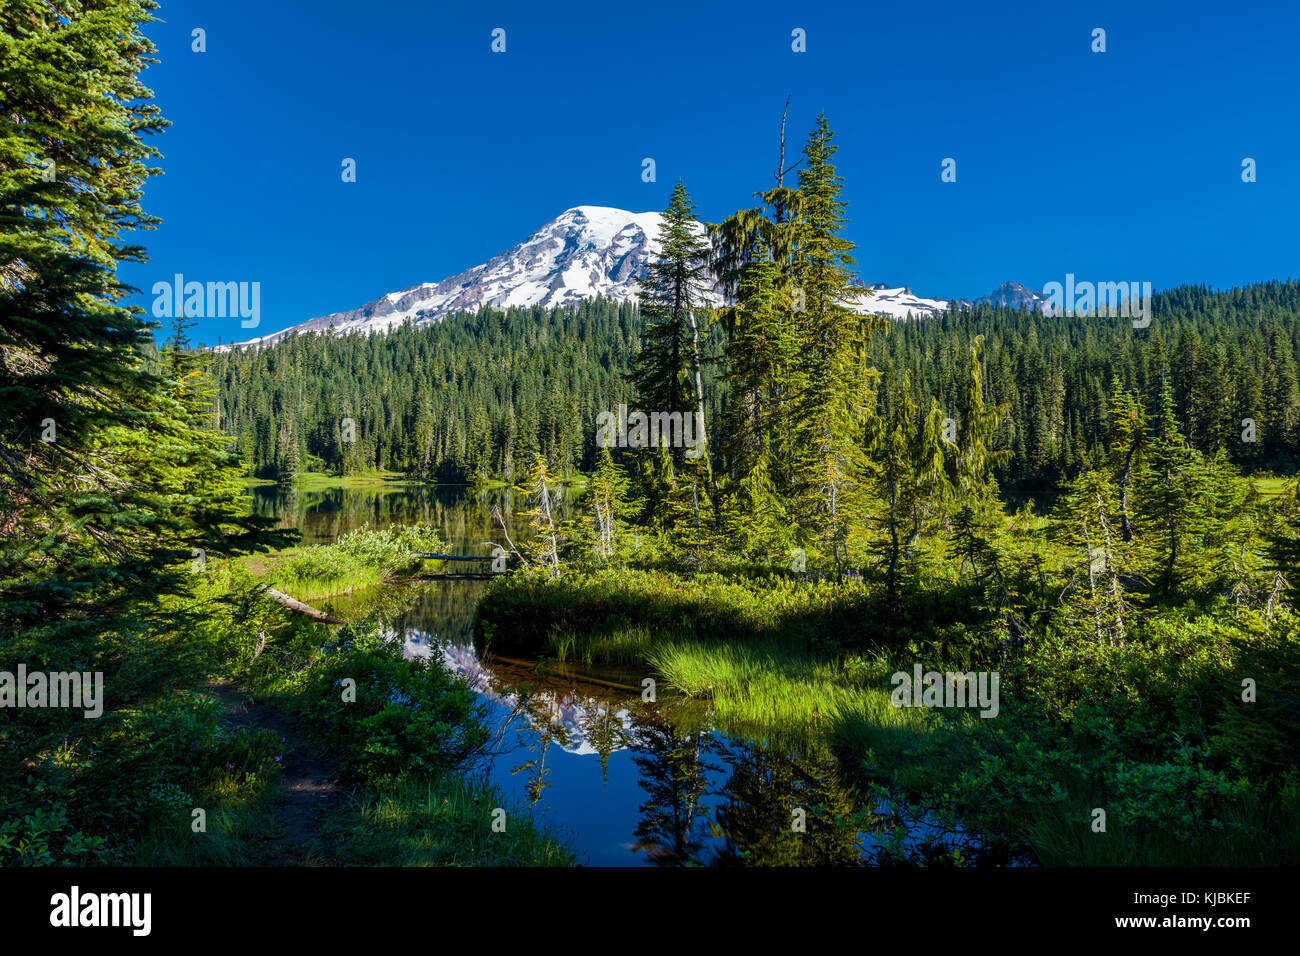 Reflection of Mount Rainier in Reflection Lake on the Stevens Canyon Road in Mount Rainier National Park in Washington State in the United States Stock Photo